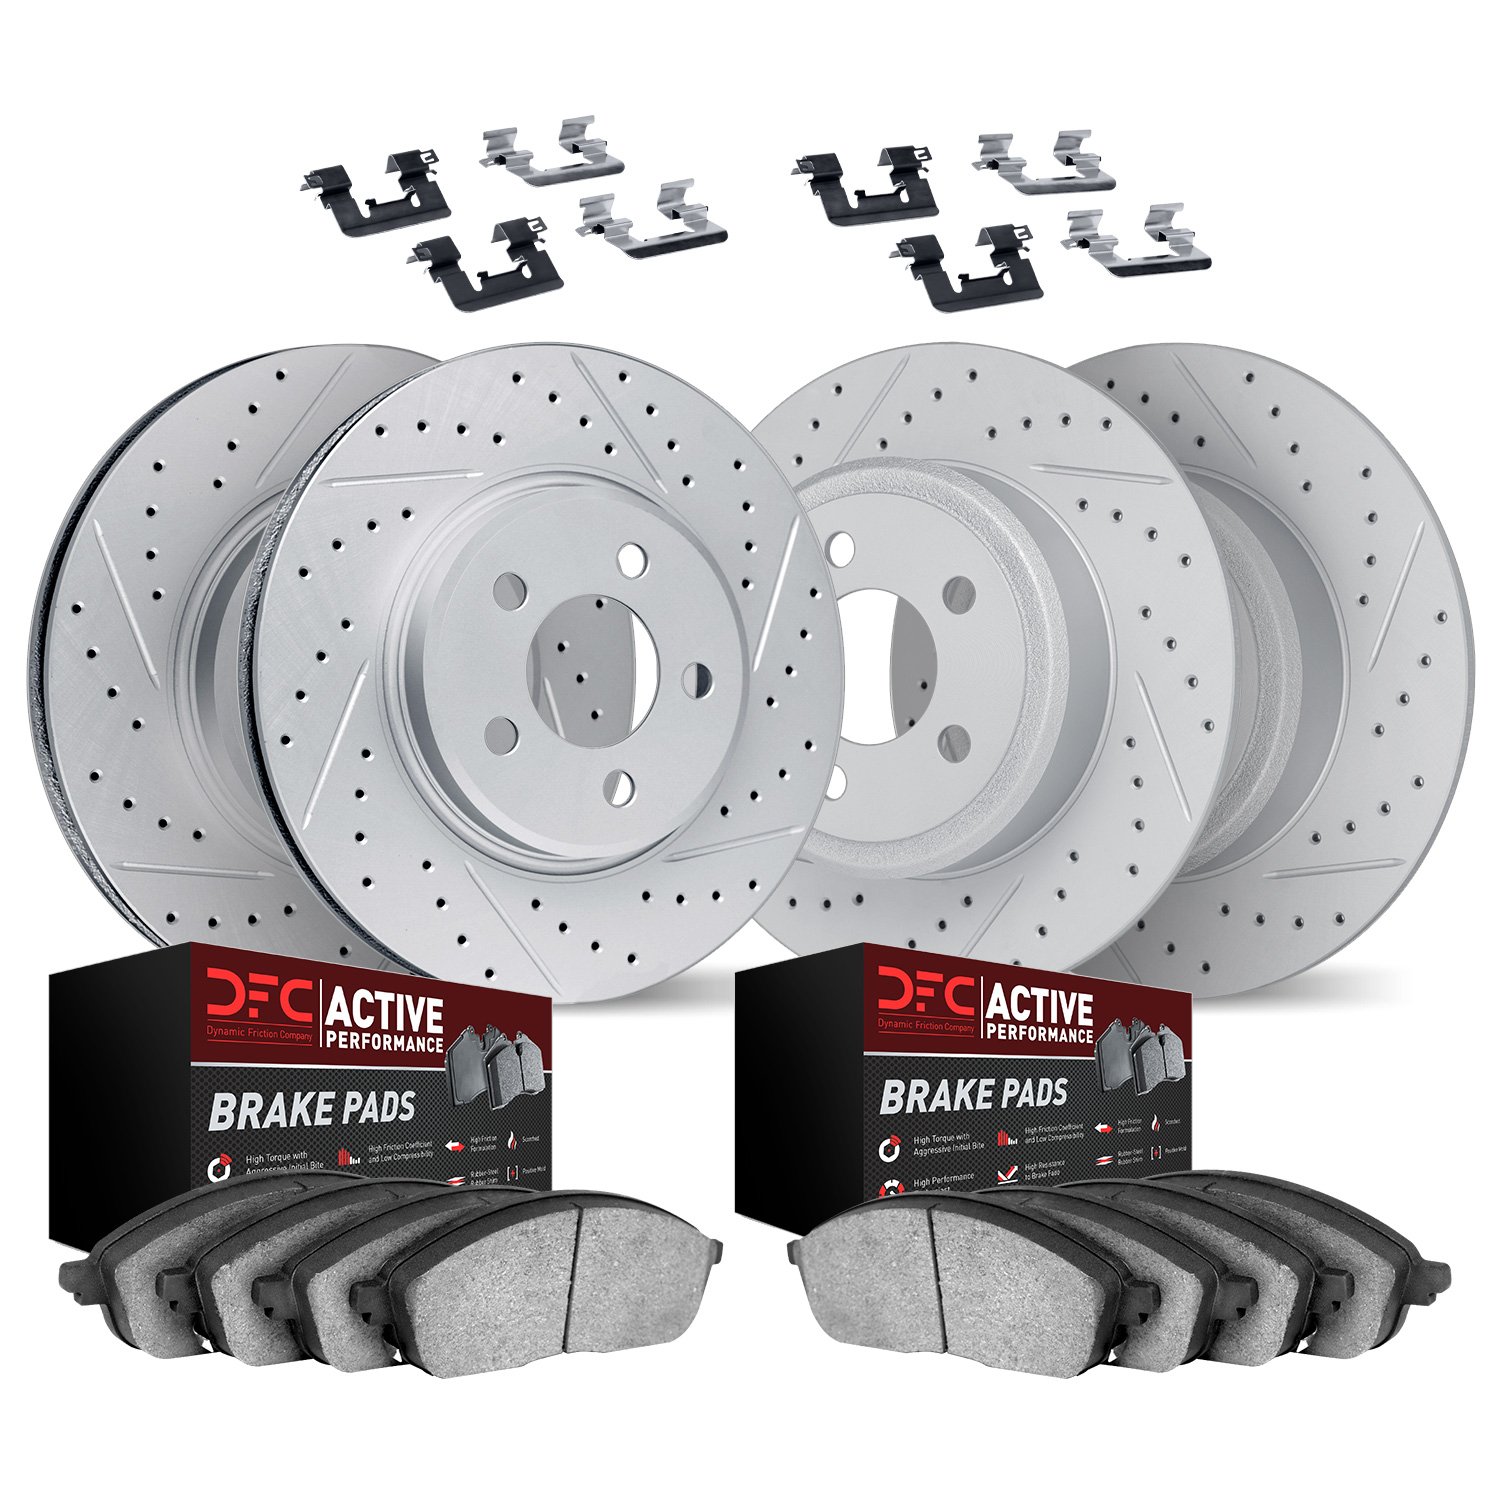 2714-73003 Geoperformance Drilled/Slotted Brake Rotors with Active Performance Pads Kit & Hardware, 2000-2009 Audi/Volkswagen, P